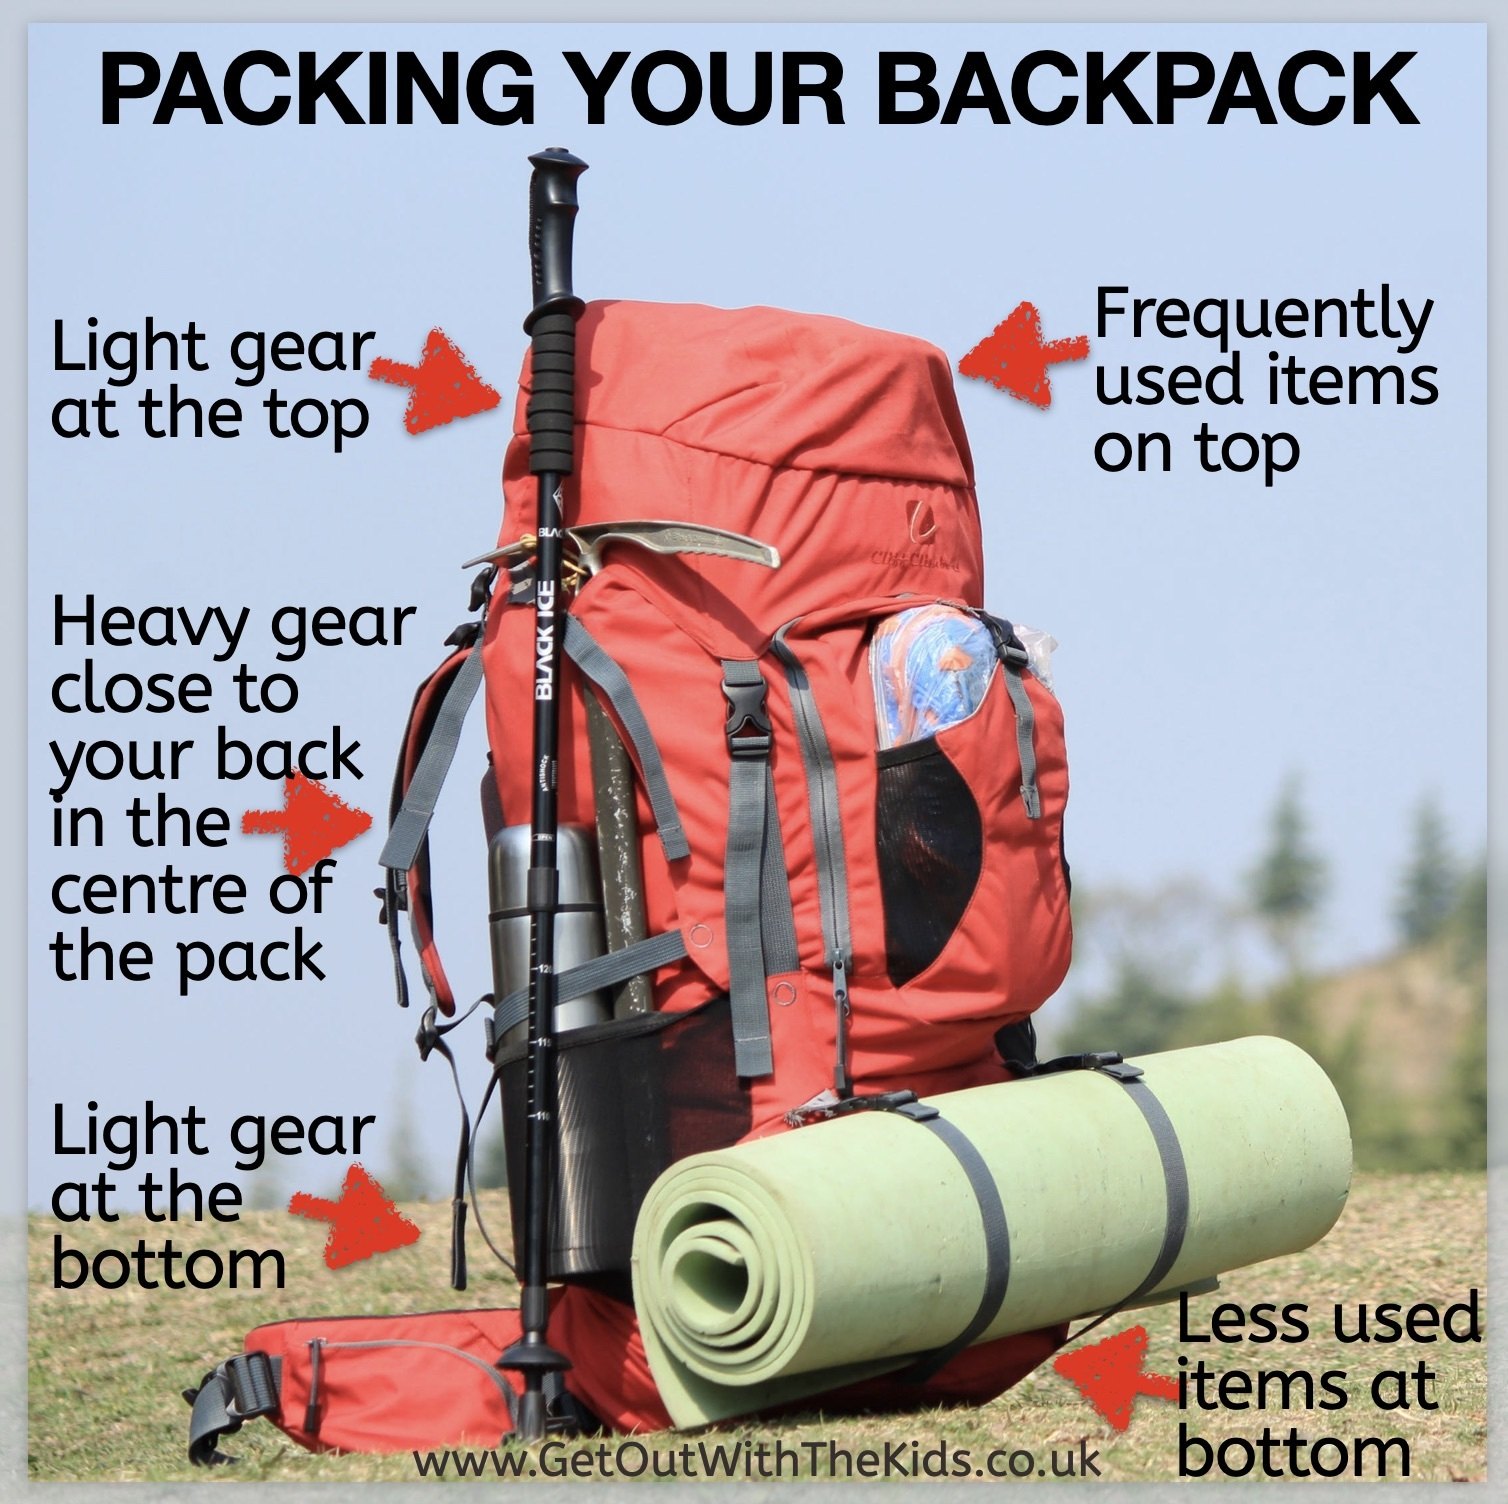 How to pack your backpack